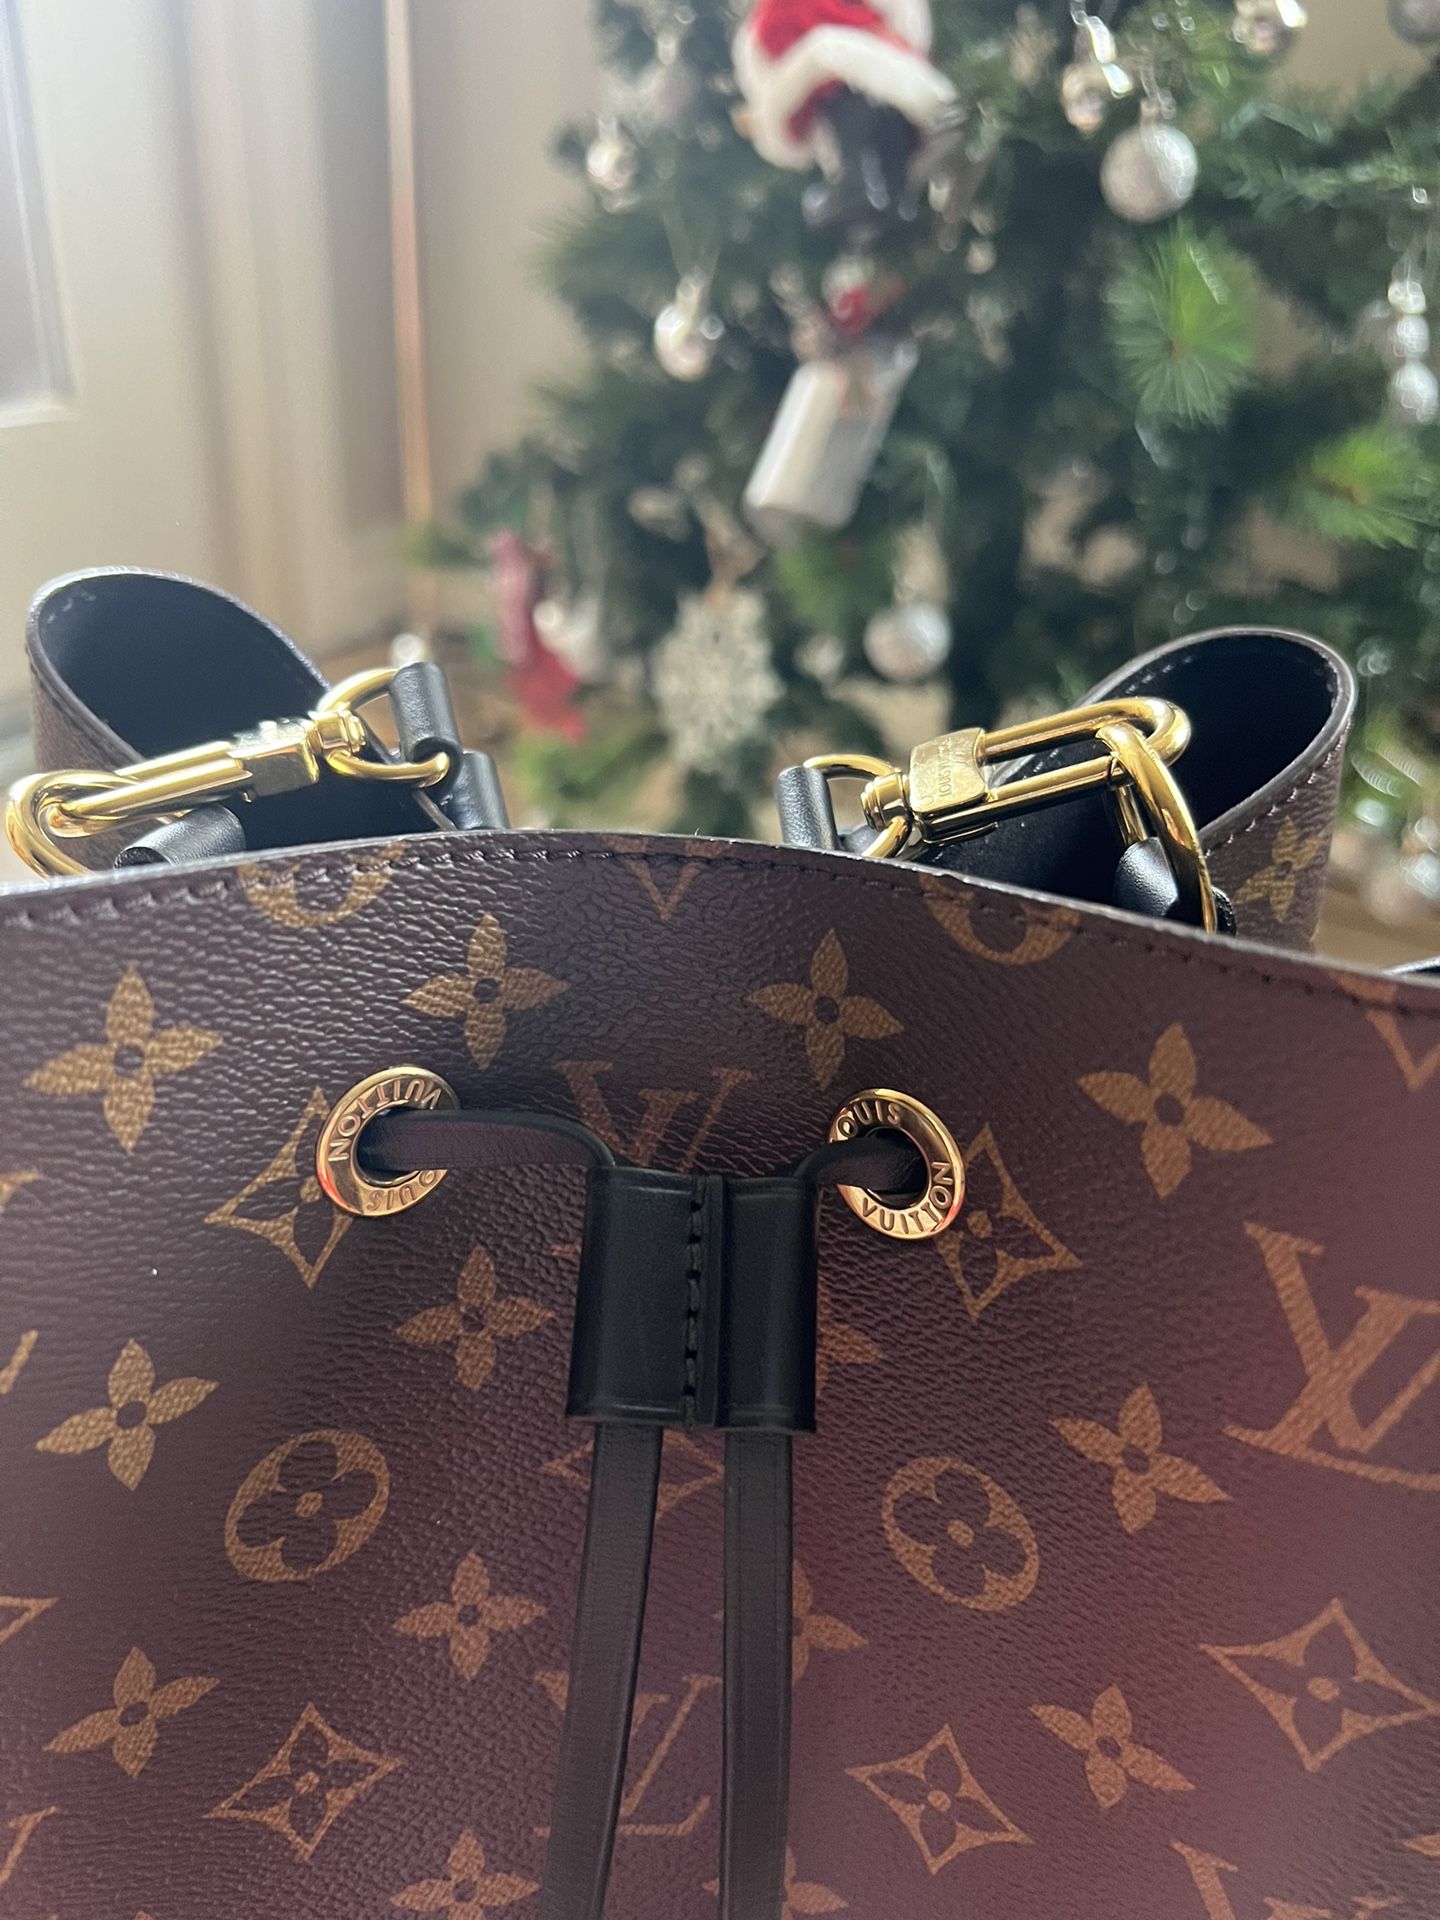 Louis Vuitton Neo Caddy MM Denim Bag for Sale in Fremont, CA - OfferUp